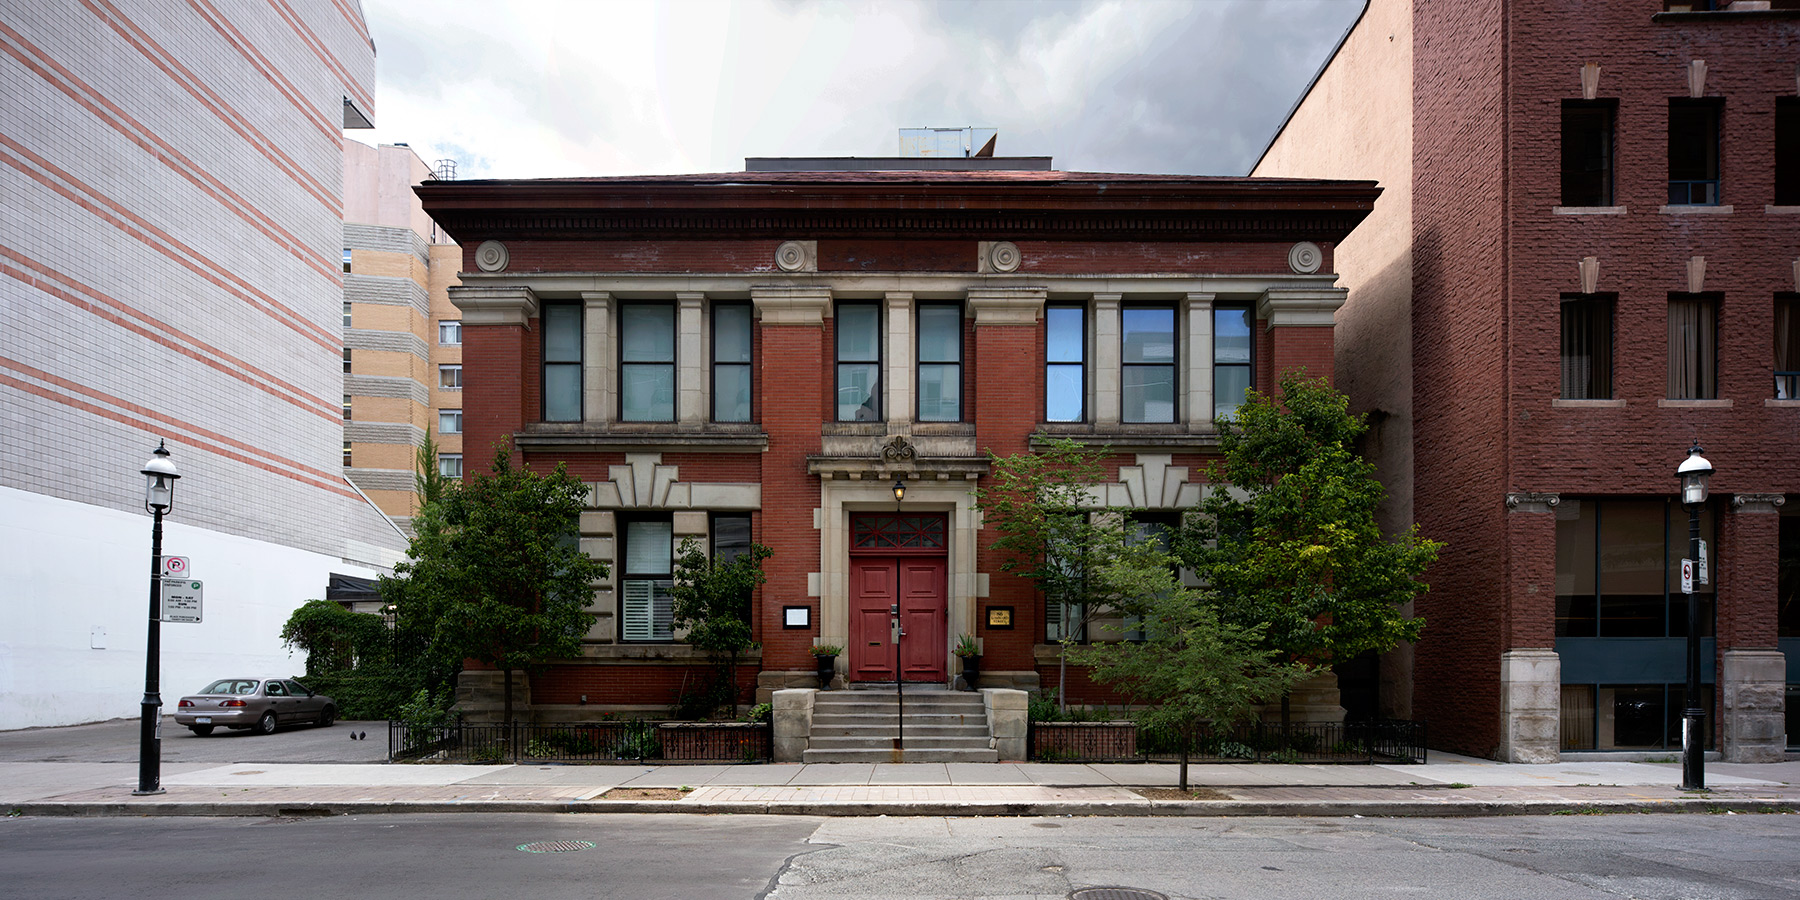 20150821. 86 Lombard, the former City Morgue for Toronto (Robert